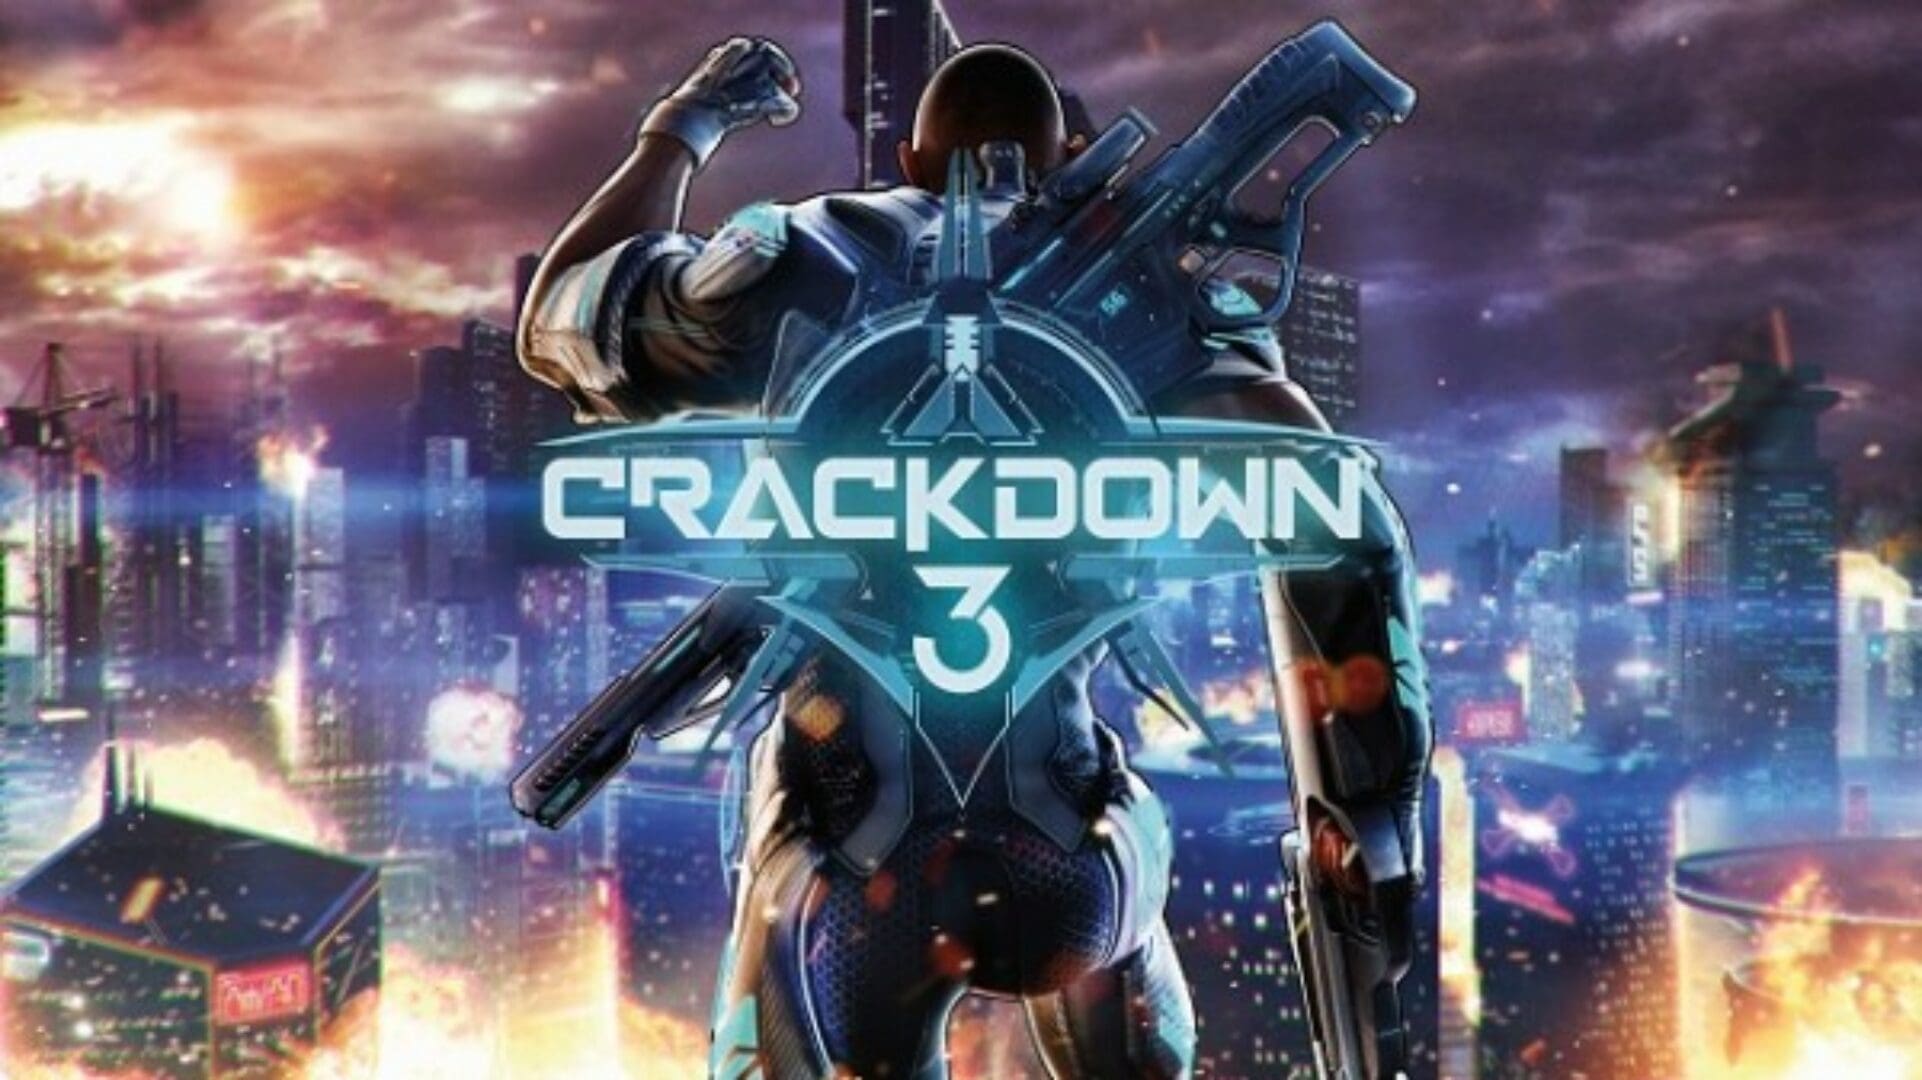 E3 2017: Hands-On with Crackdown 3